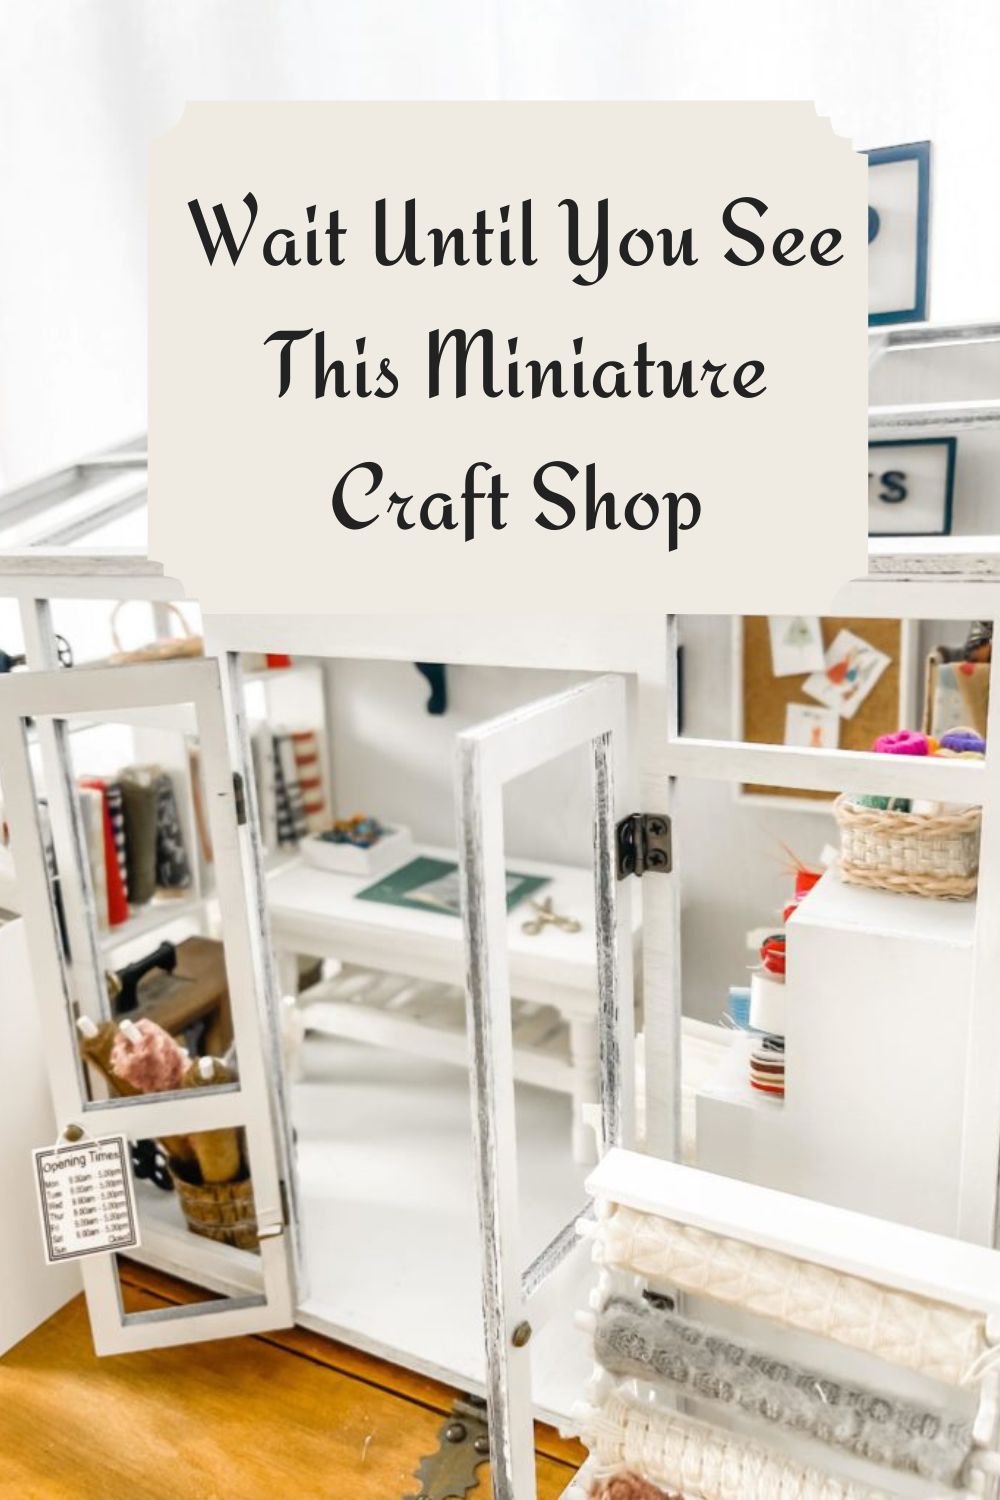 Wait Until You See This Miniature Craft Shop